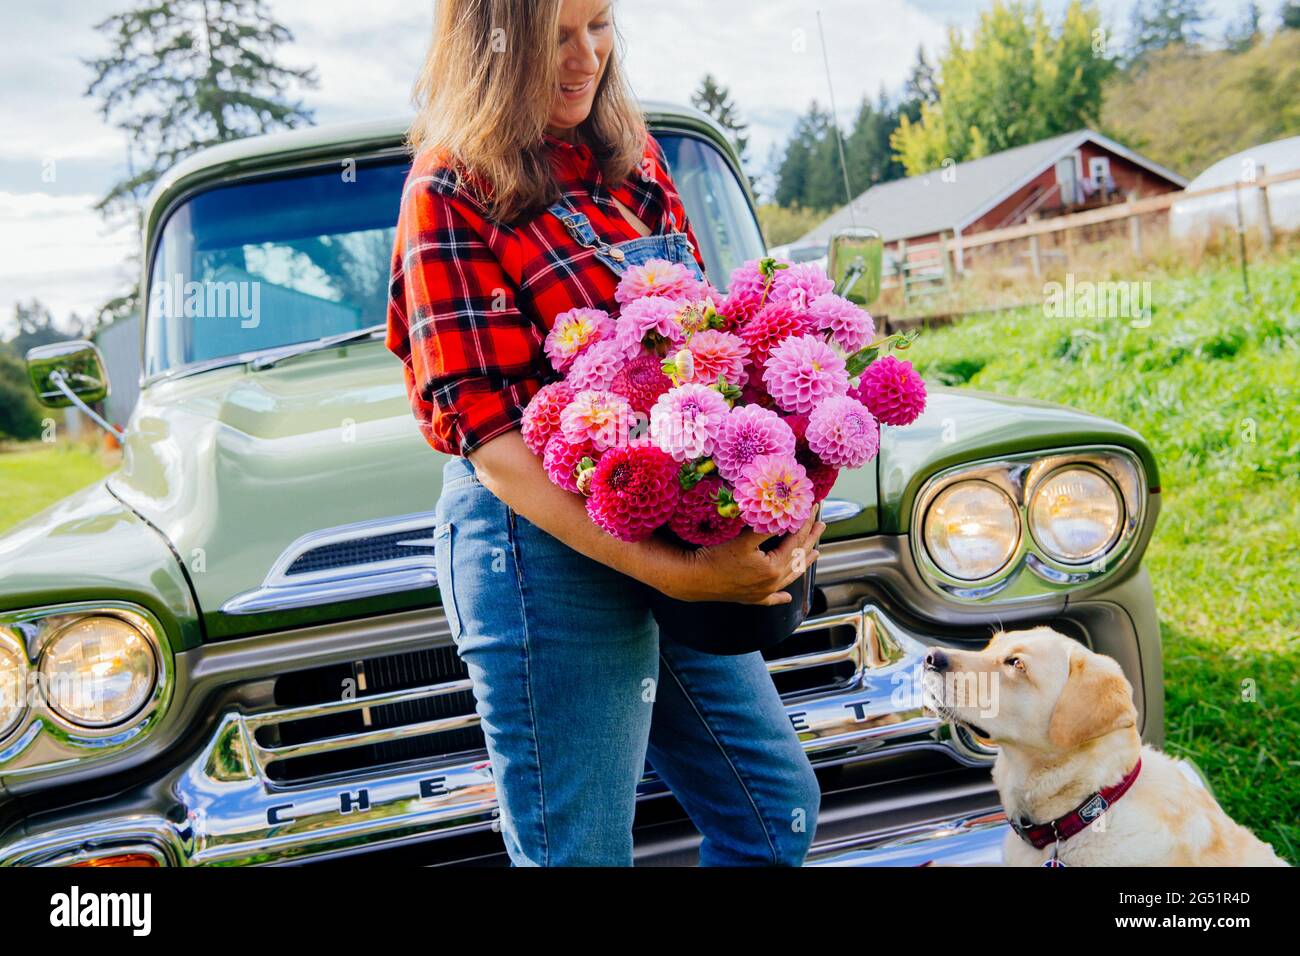 Woman with Dahlia flowers and dog in front of truck Stock Photo